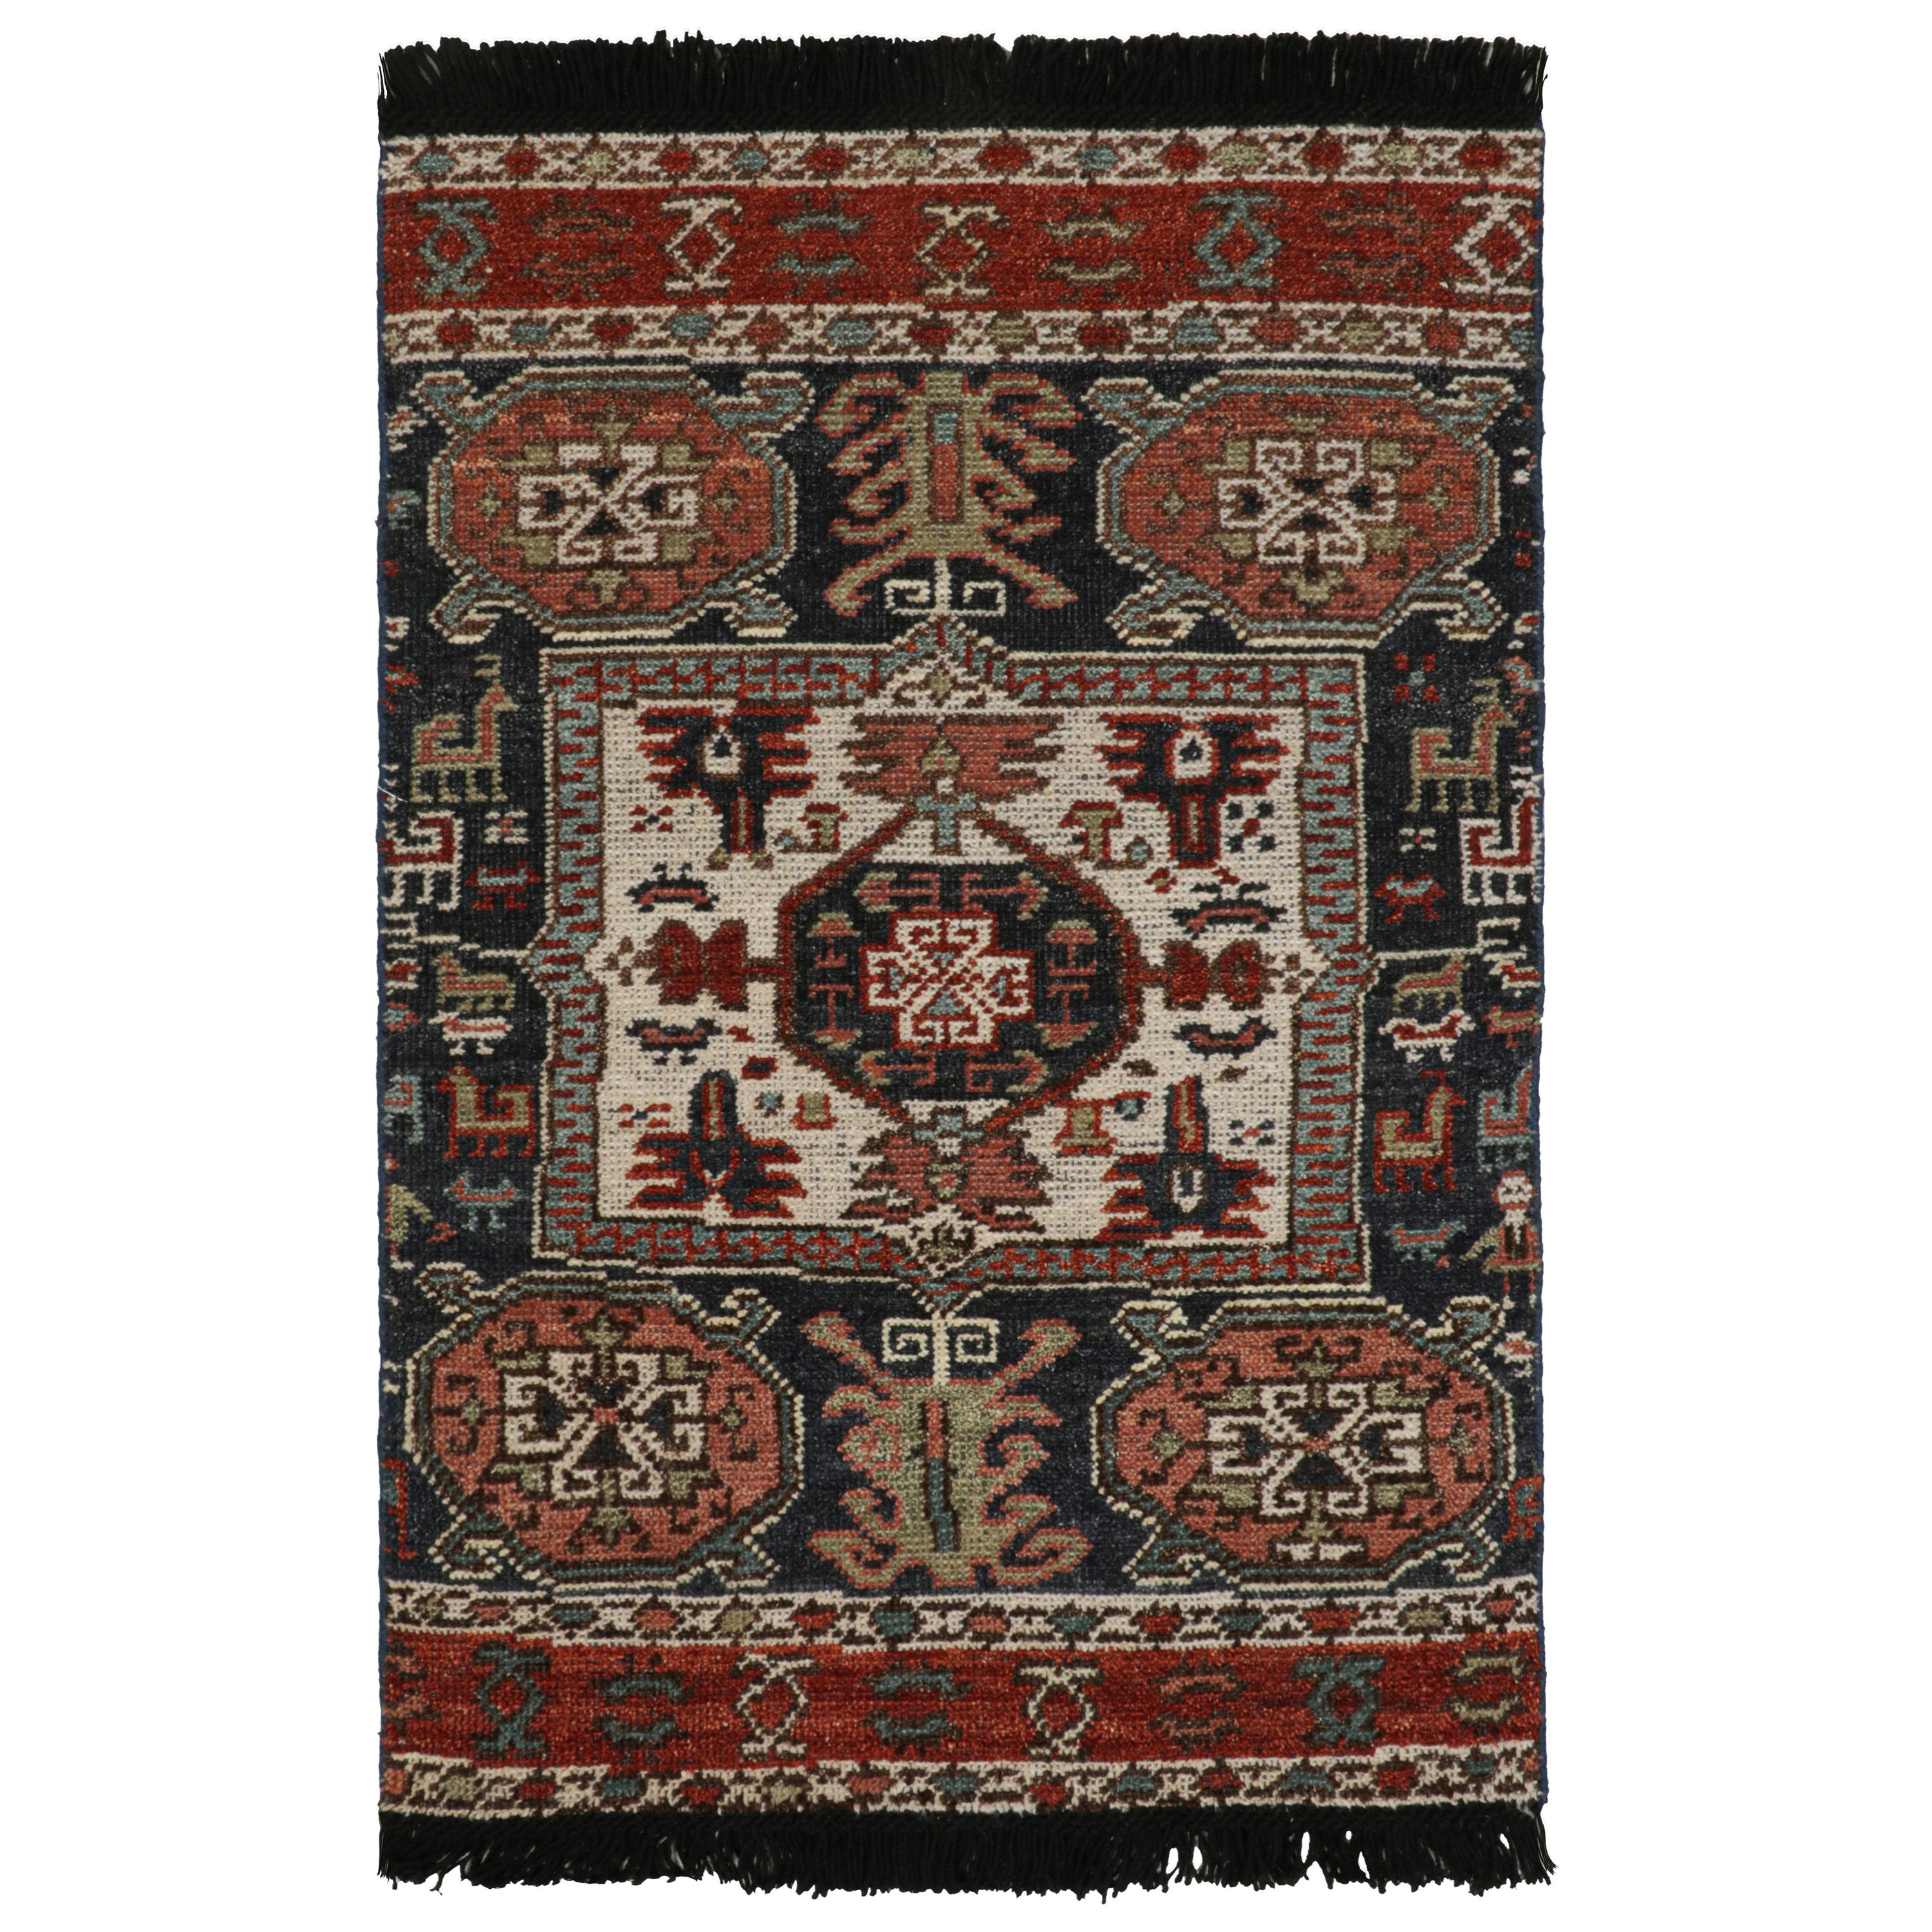 Rug & Kilim’s Tribal Style Rug with Primitivist Geometric Pattern and Medallions For Sale